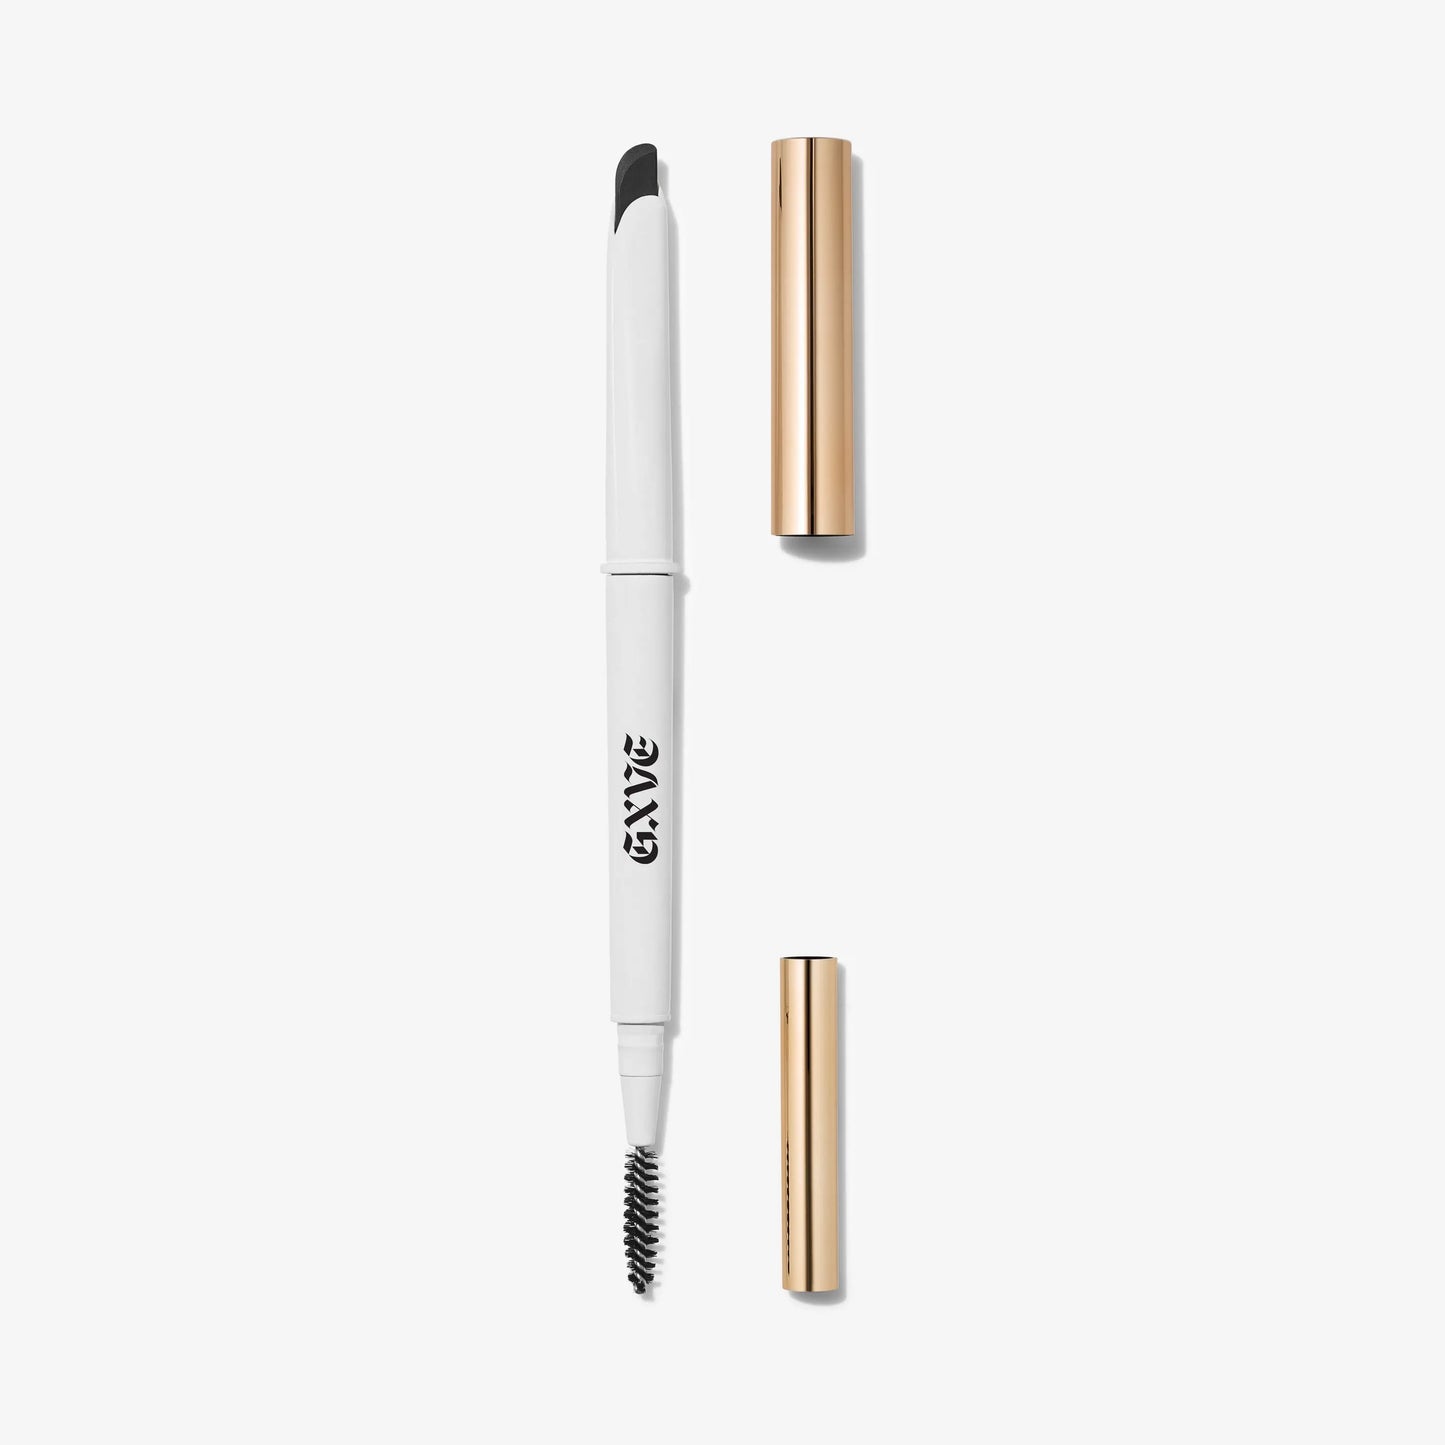 GXVE 7 - Instant Definition Sculpting Eyebrow Pencil For Bold Brows